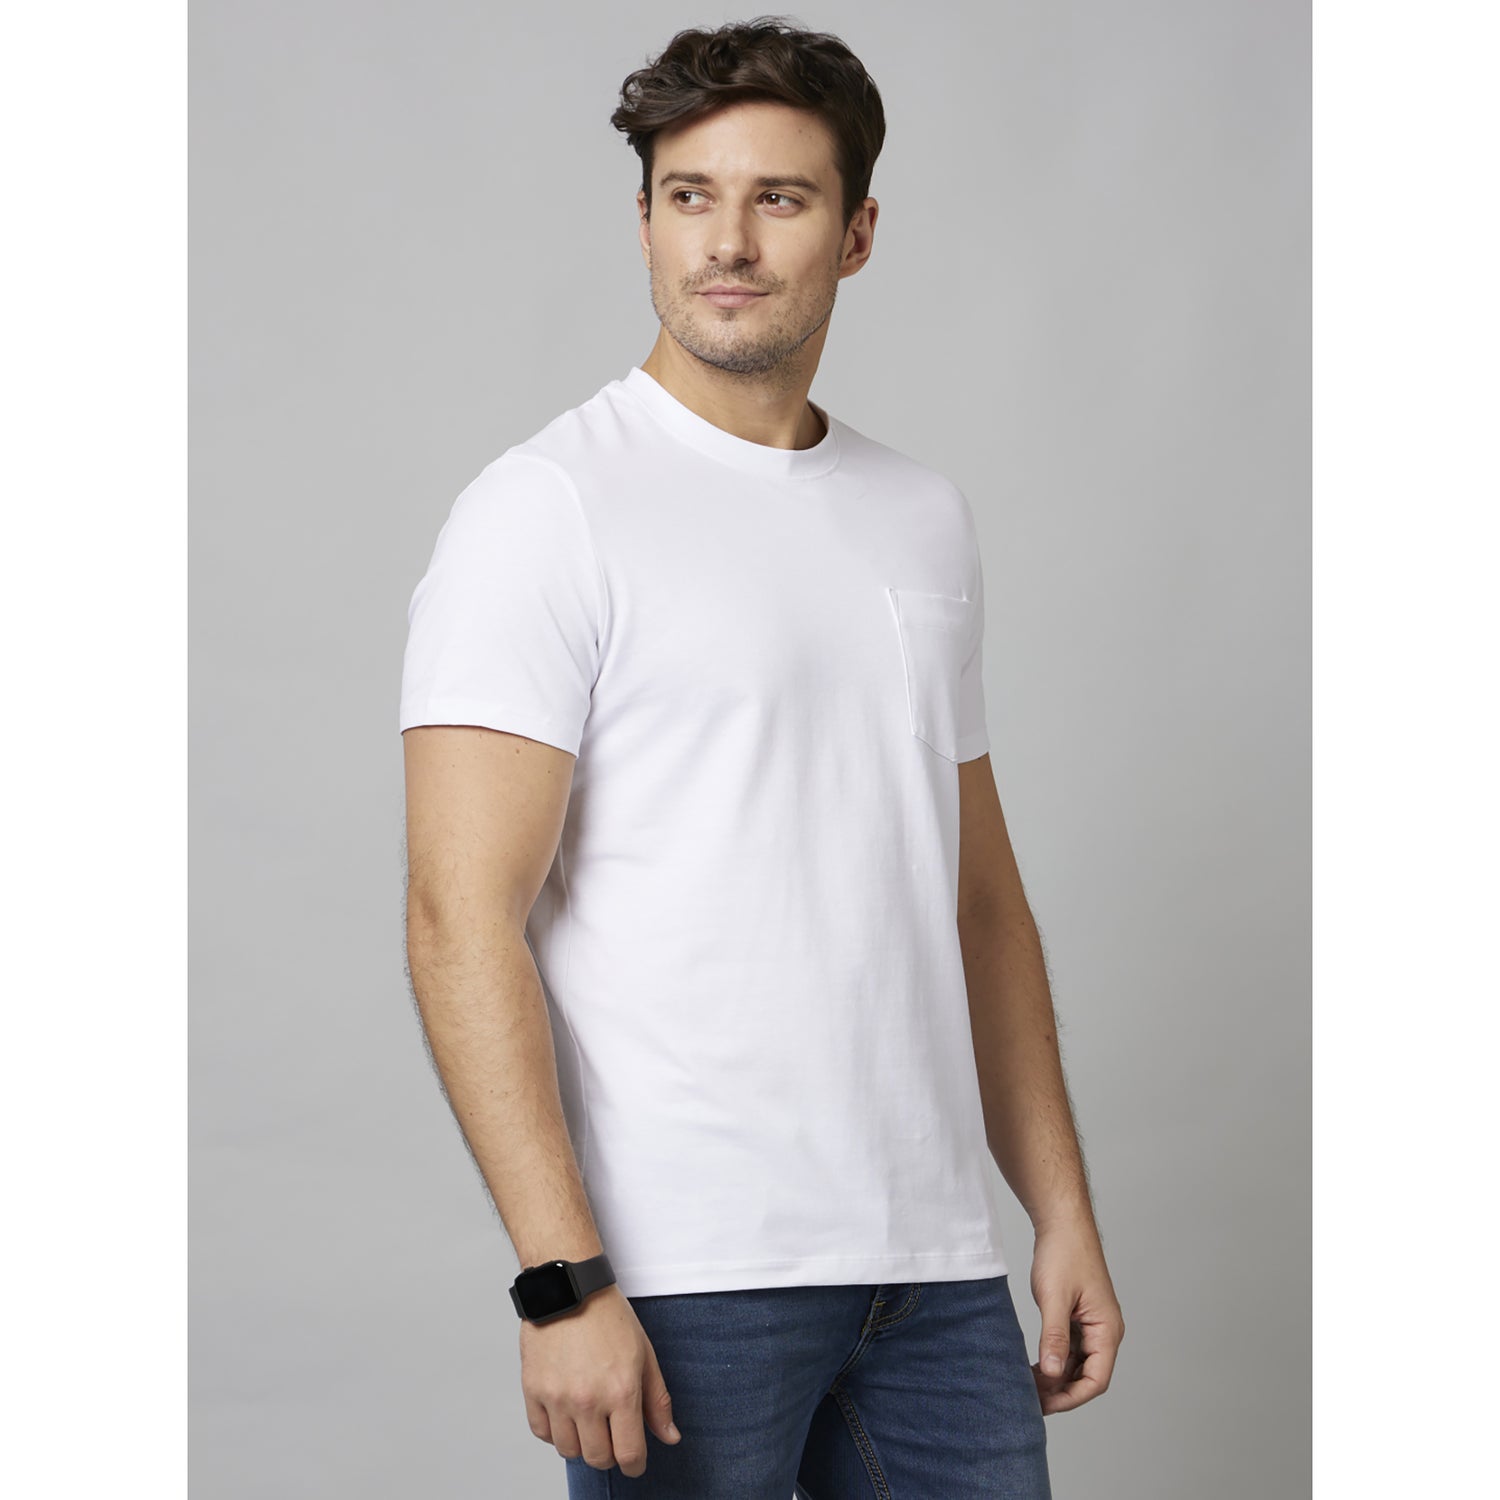 White Solid Short Sleeve Cotton Poly Blend T-Shirts (DECOMFORT)